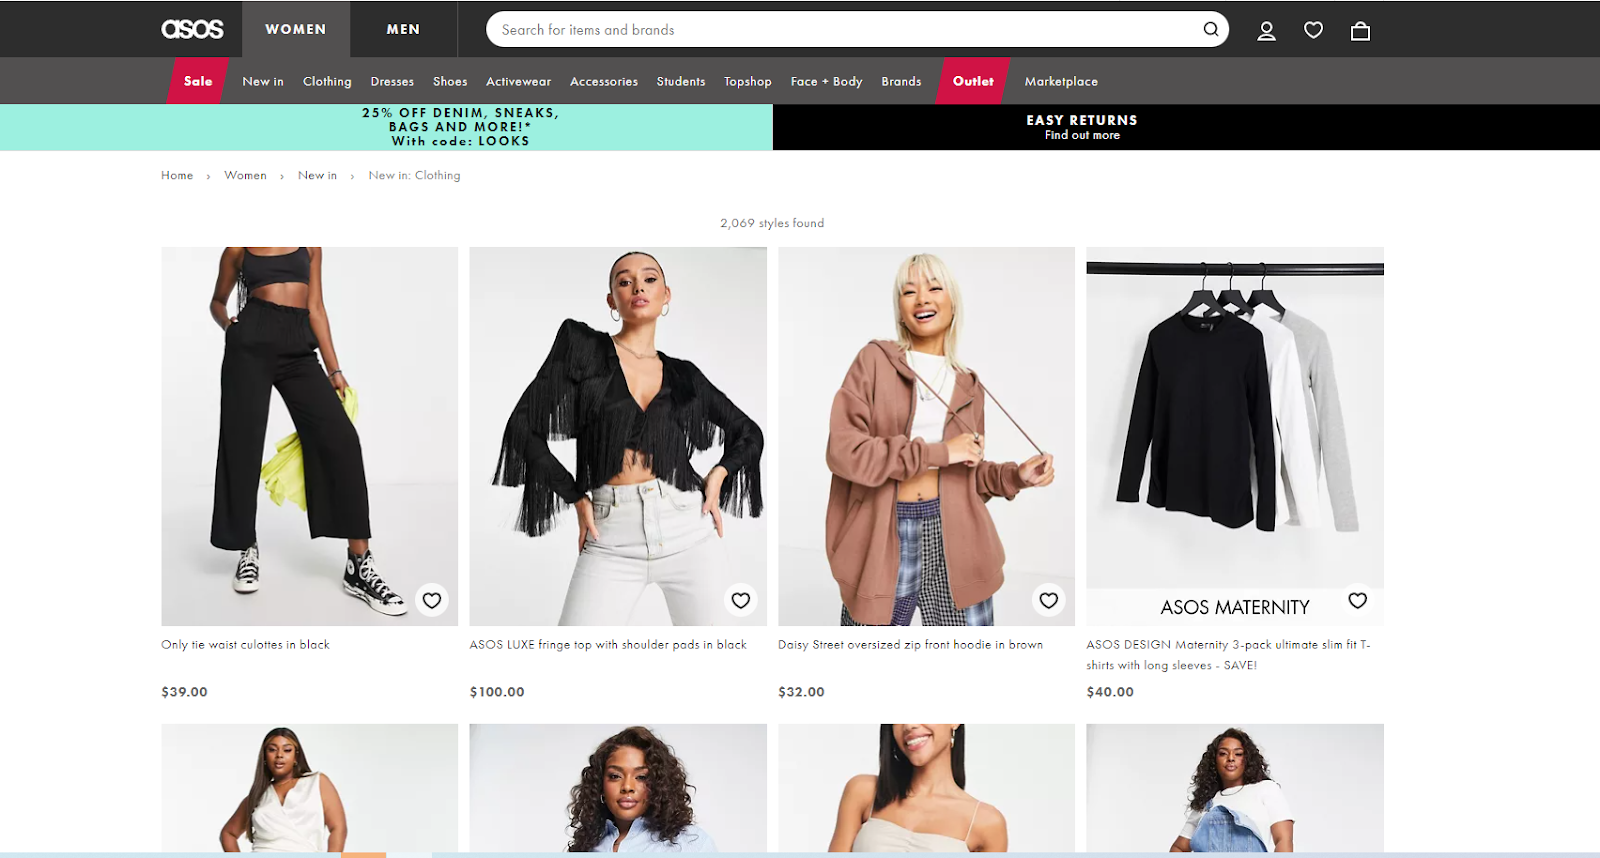 ASOS: Read This Before You Buy Something - Cloud Retouch